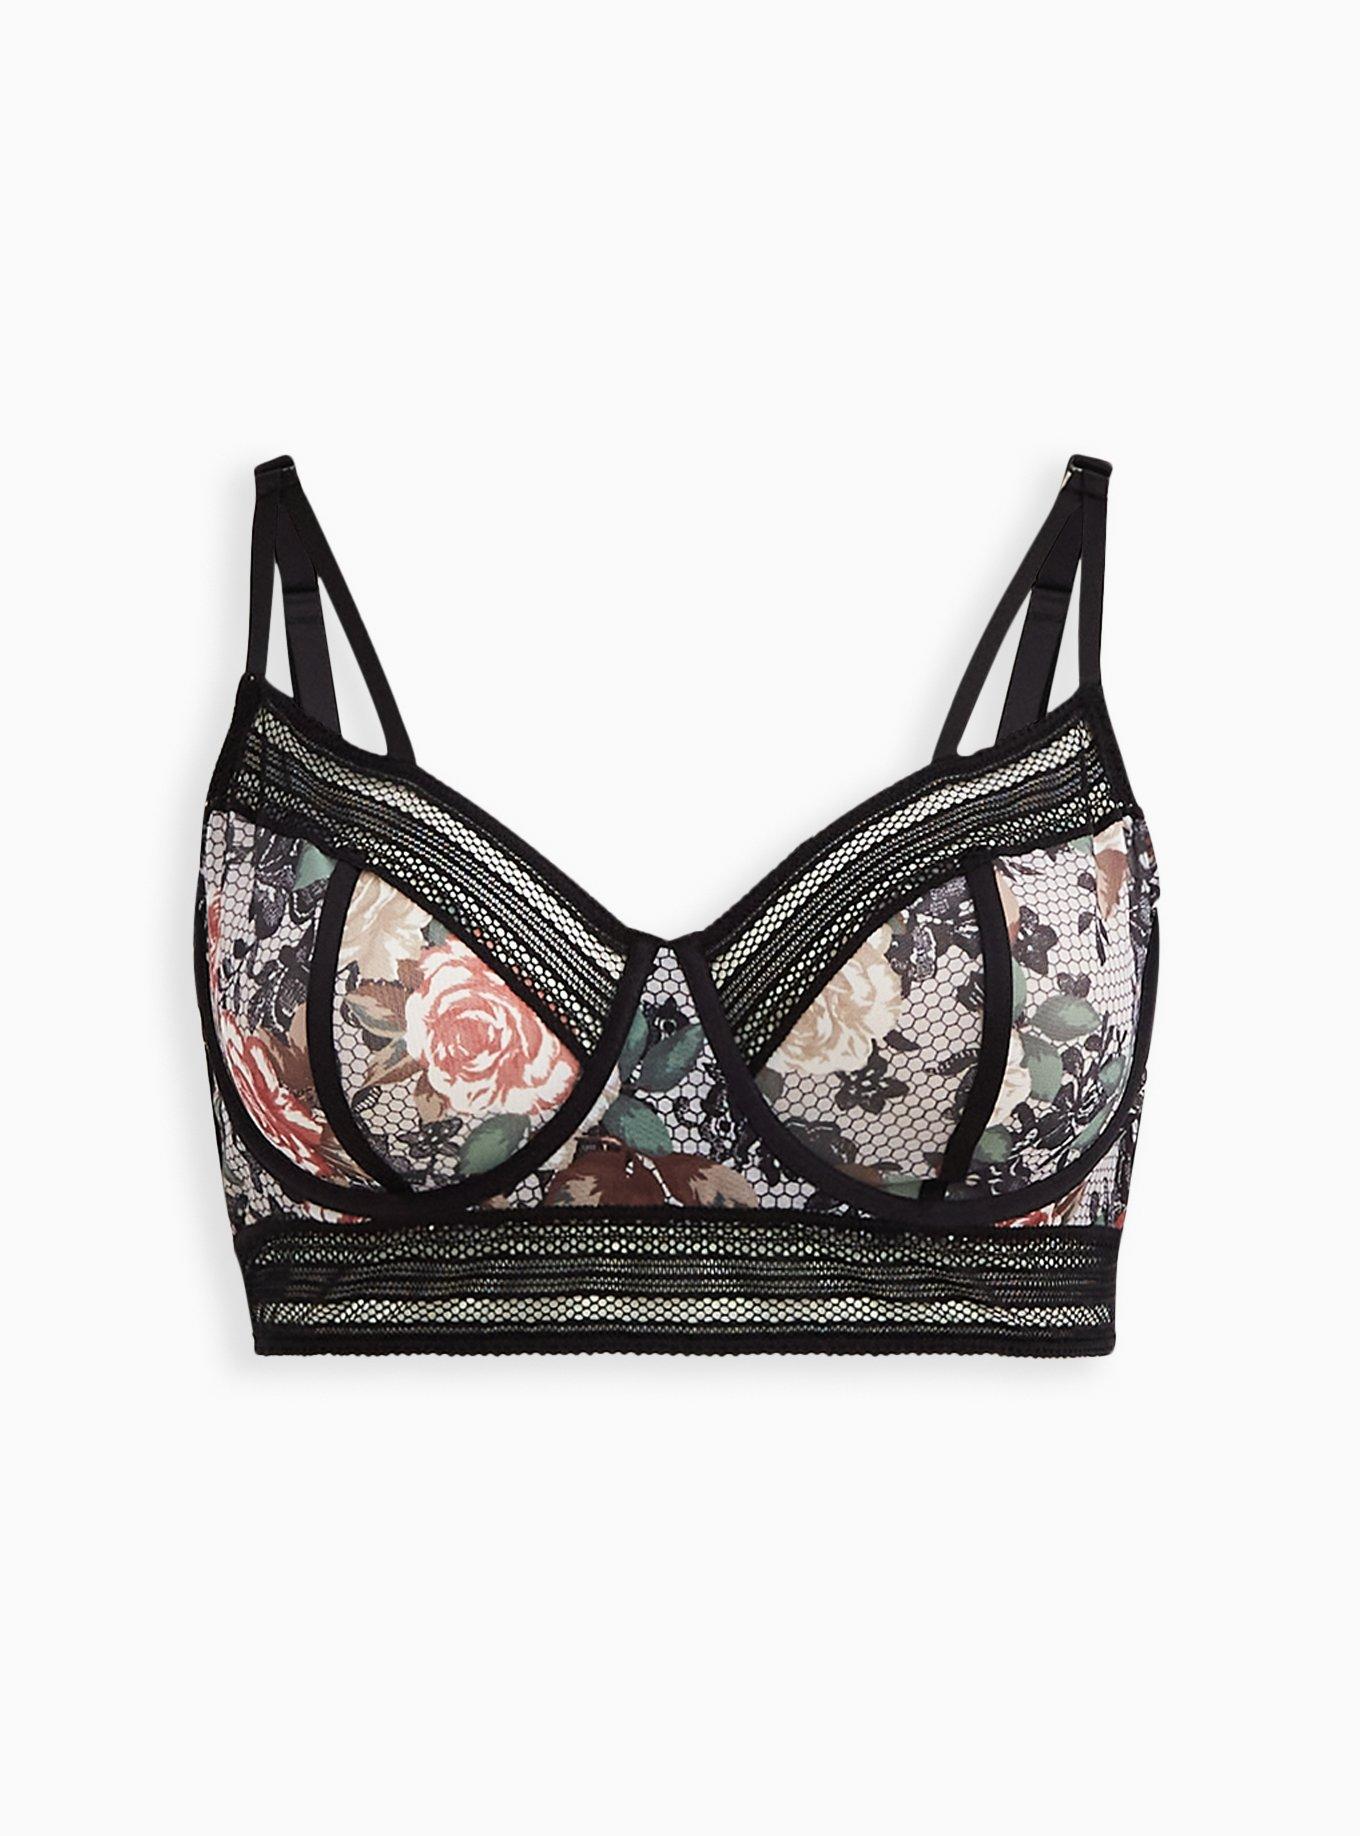 Floral Print Unlined Big Chest Fancy Bra Panty For Women